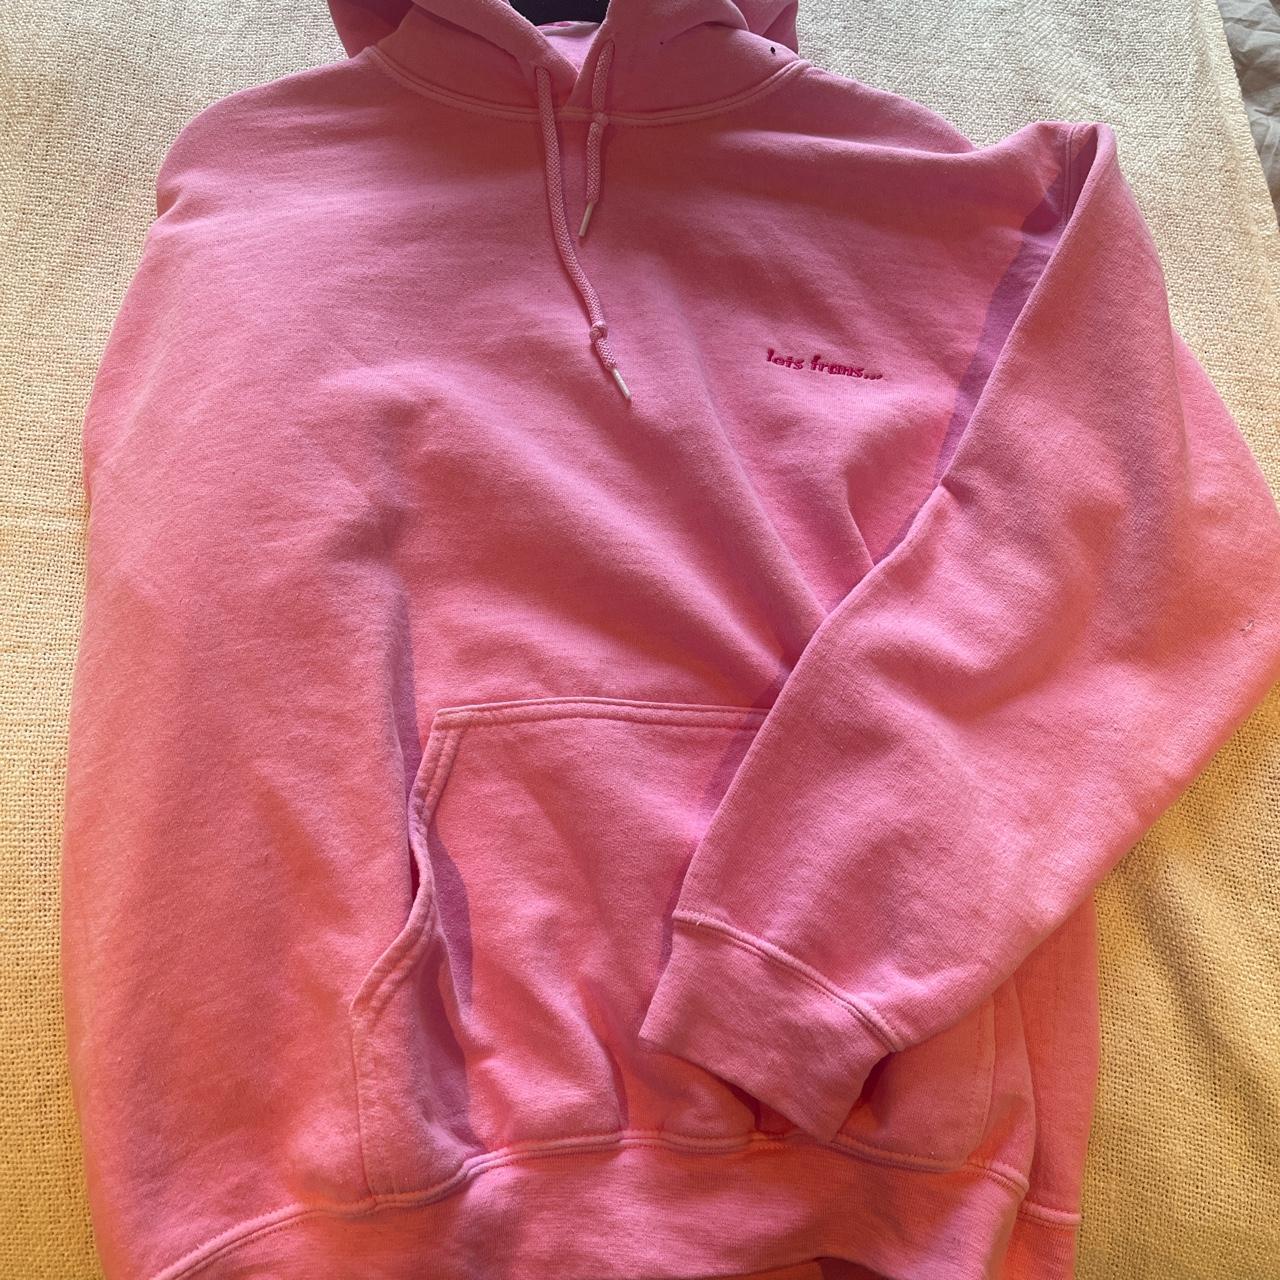 IETS FRANS PINK HOODIE NEW ONLY WORN ONCE SIZE... - Depop